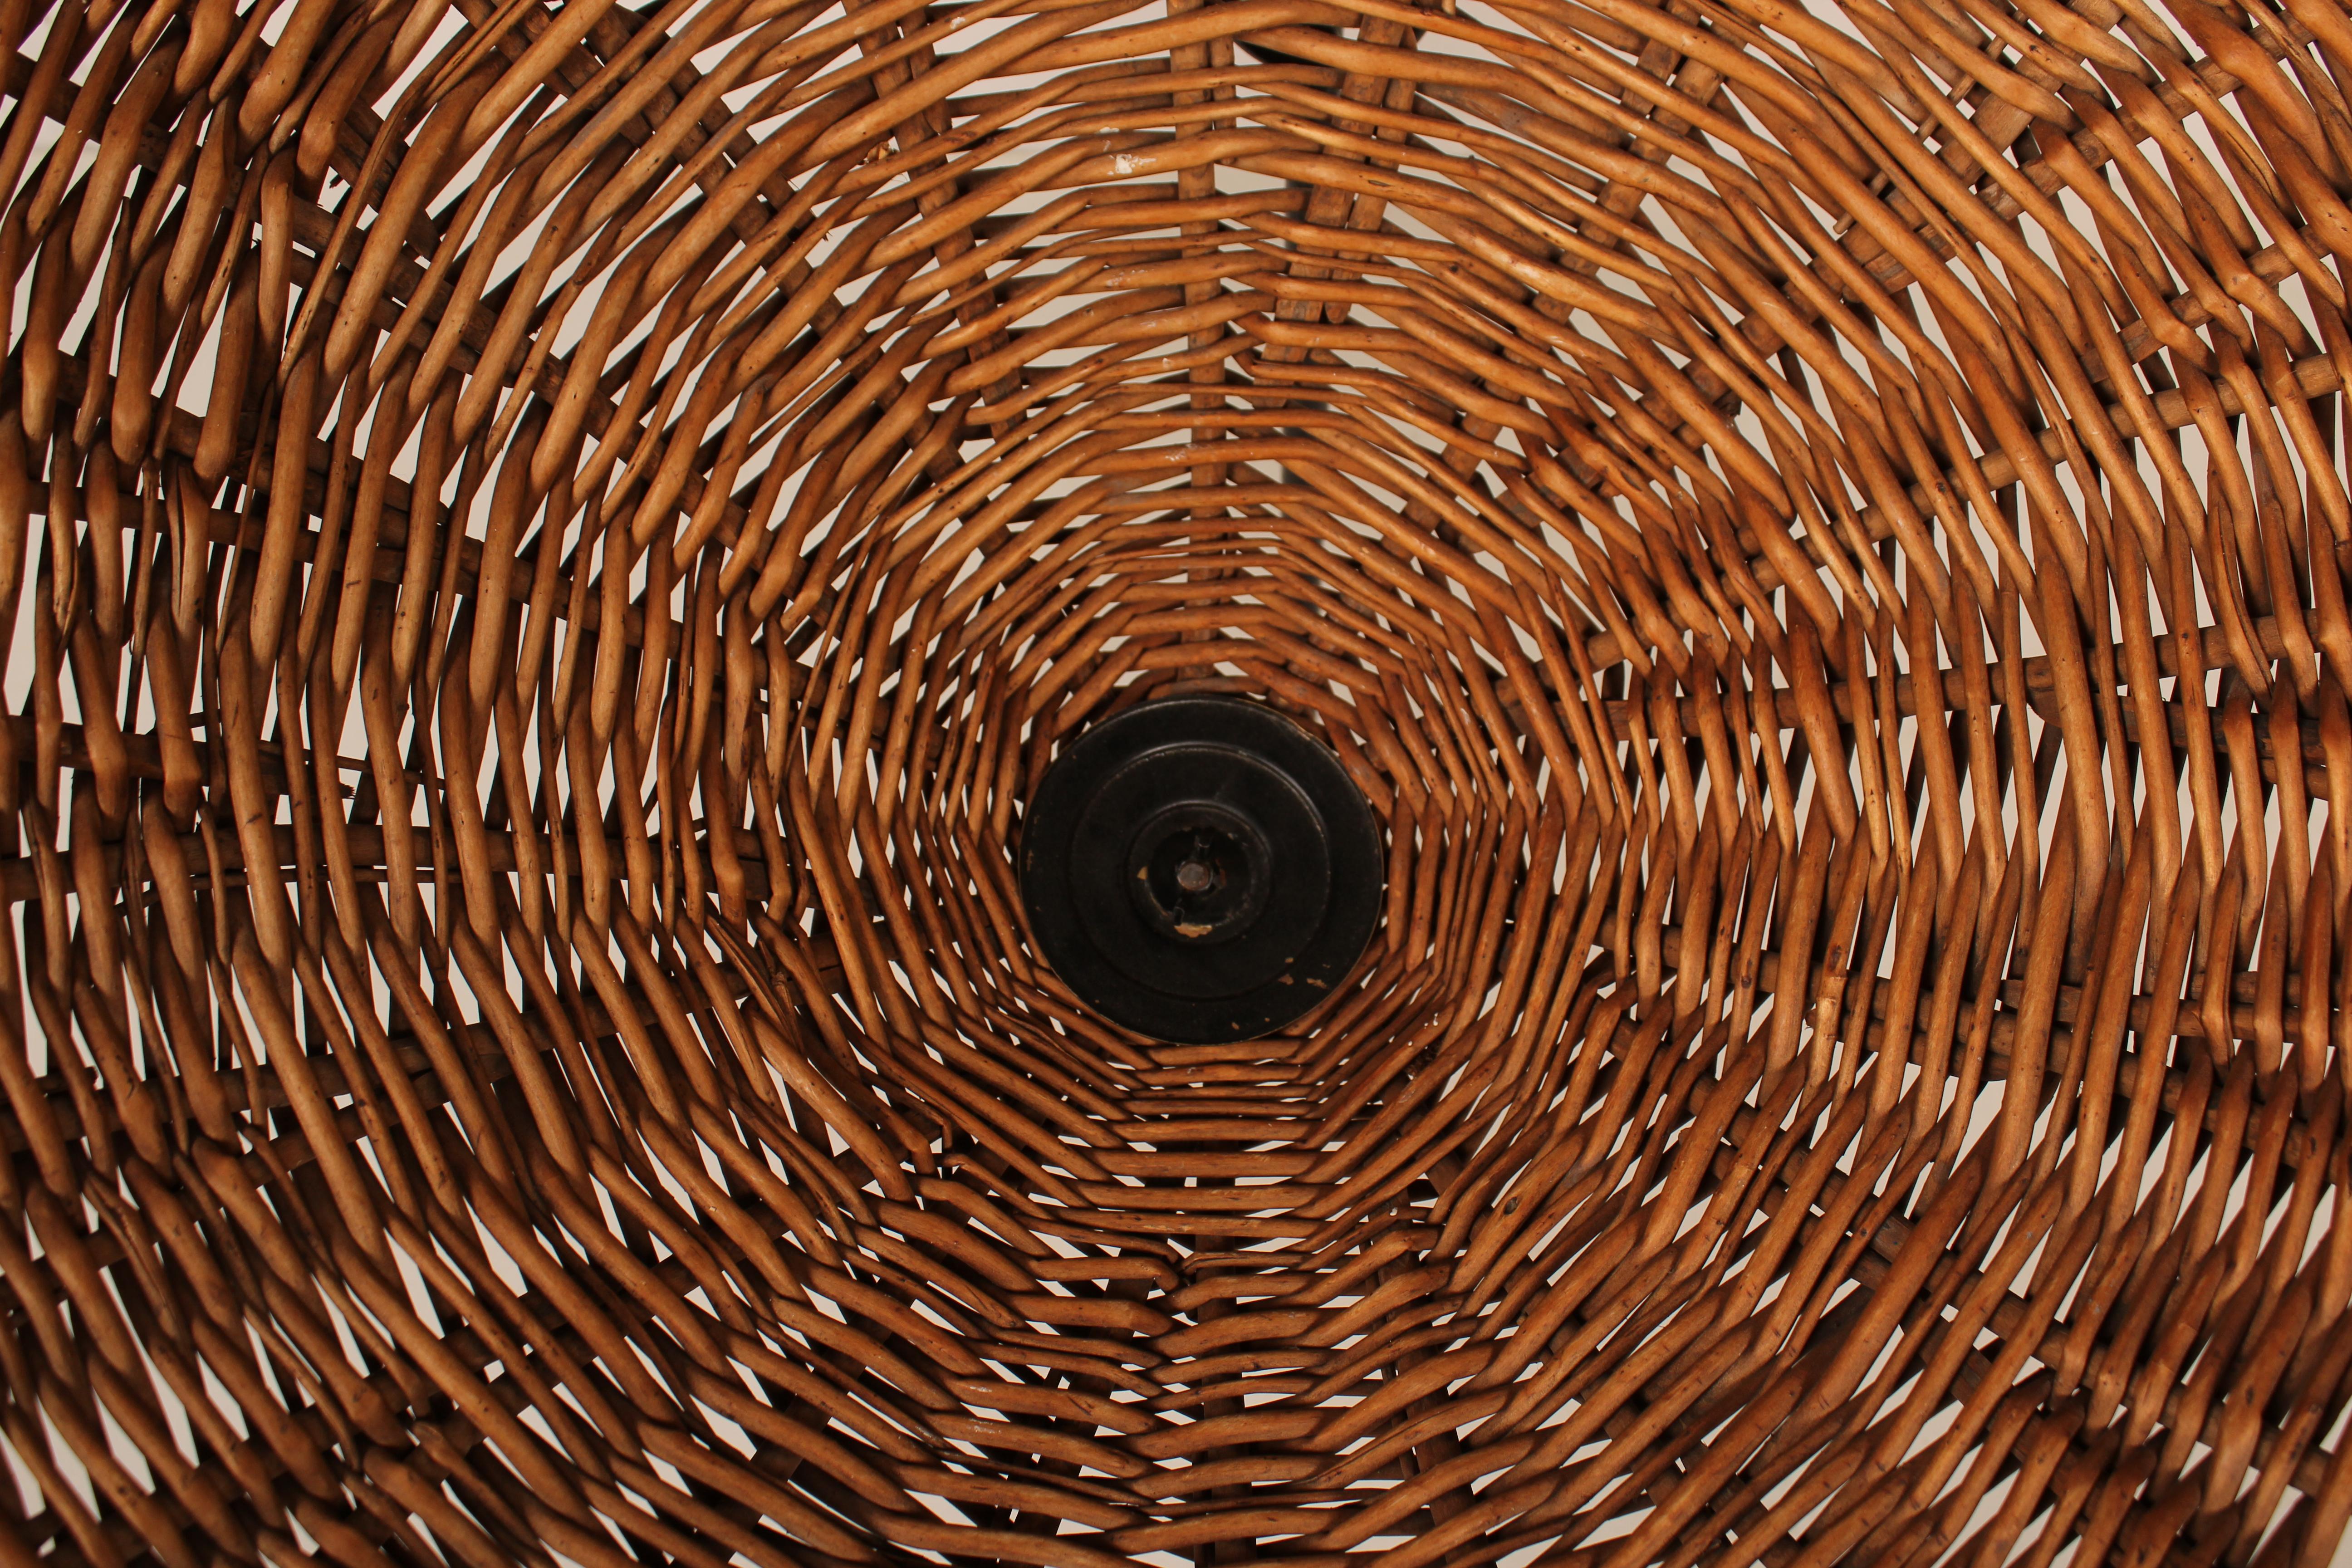 Mid-20th Century Wicker Sunflower Chair by Roberto Mango for Tecno, Italy, 1952